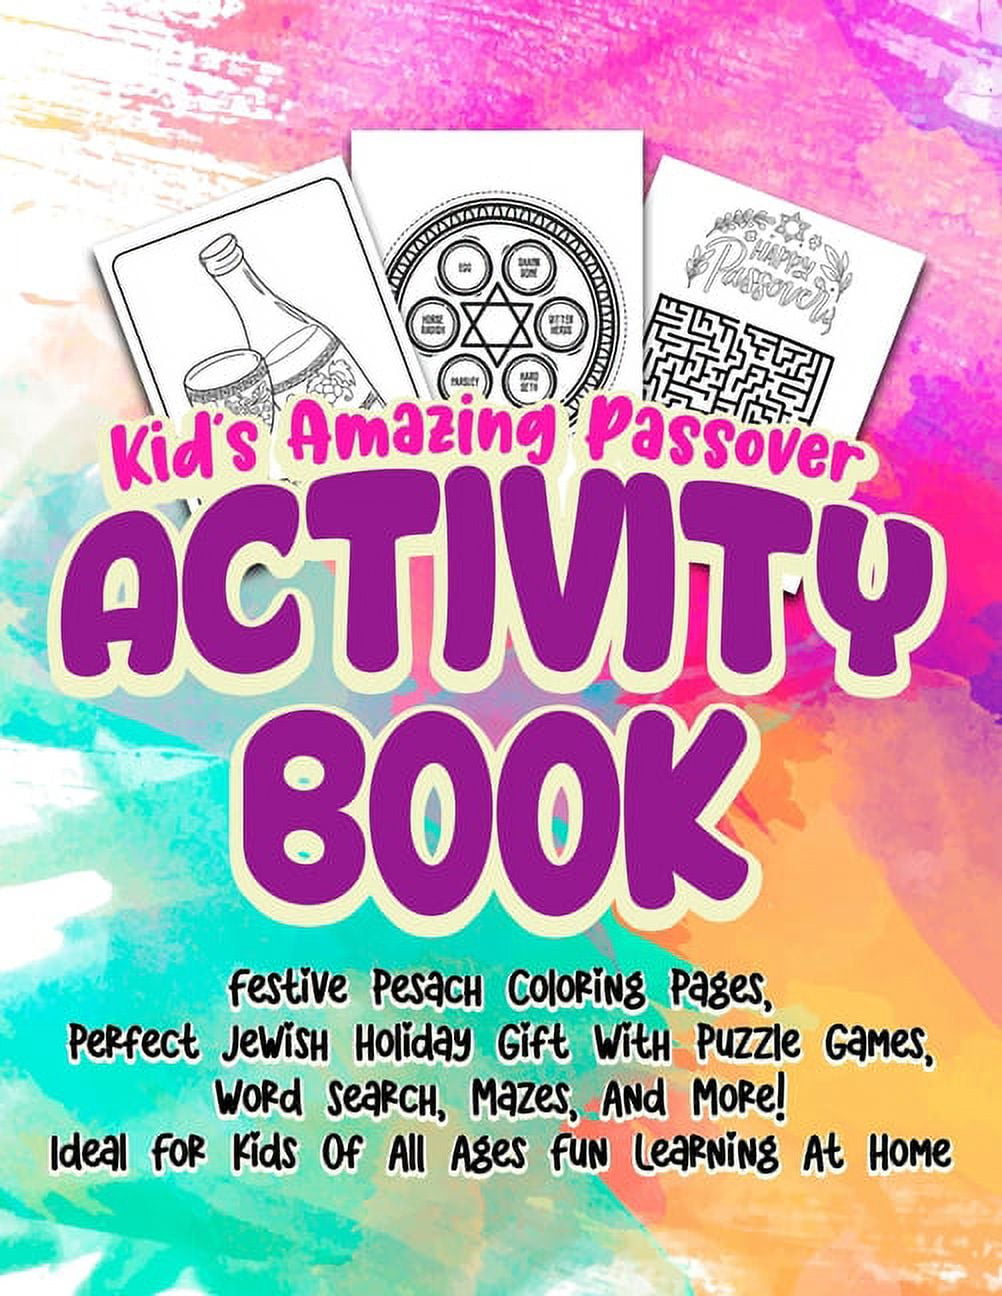 Kids amazing passover activity book festive pesach coloring pages perfect jewish holiday gift with puzzle games word search mazes and more ideal for kids of all ages fun learning at home